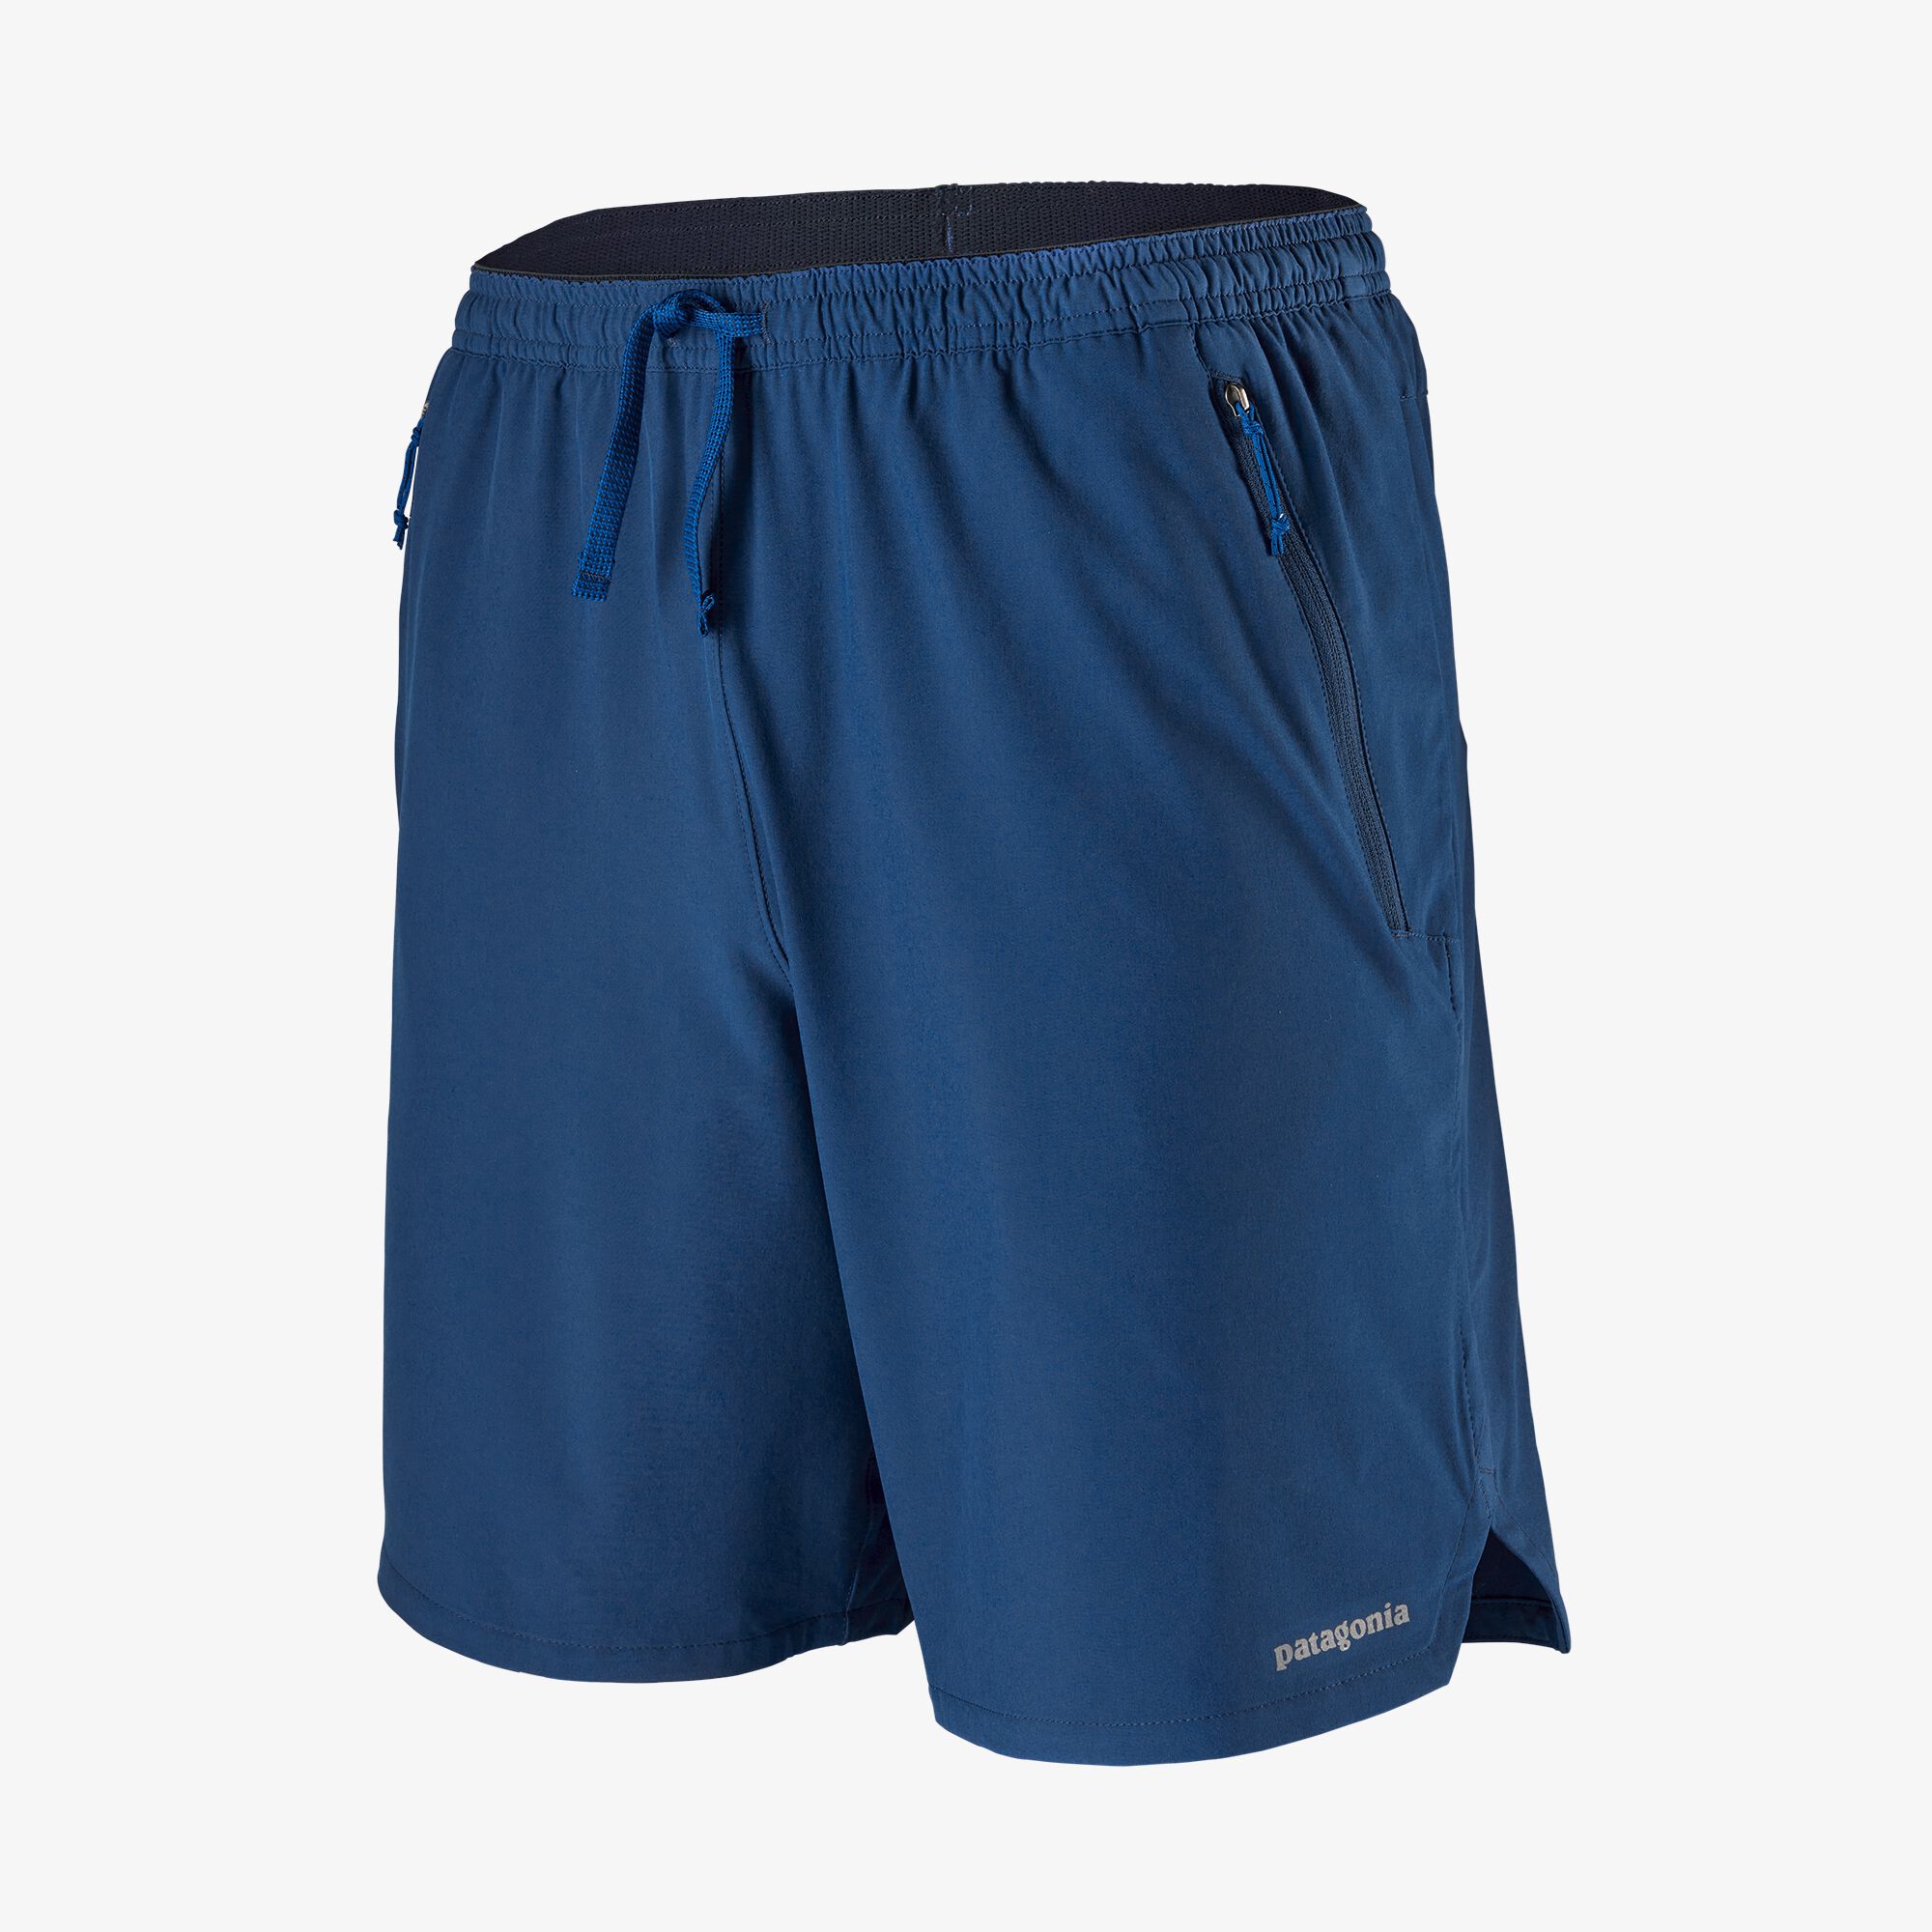 Patagonia Men's Nine Trails Shorts - 20cm Leg - Recycled Polyester, Superior Blue / M